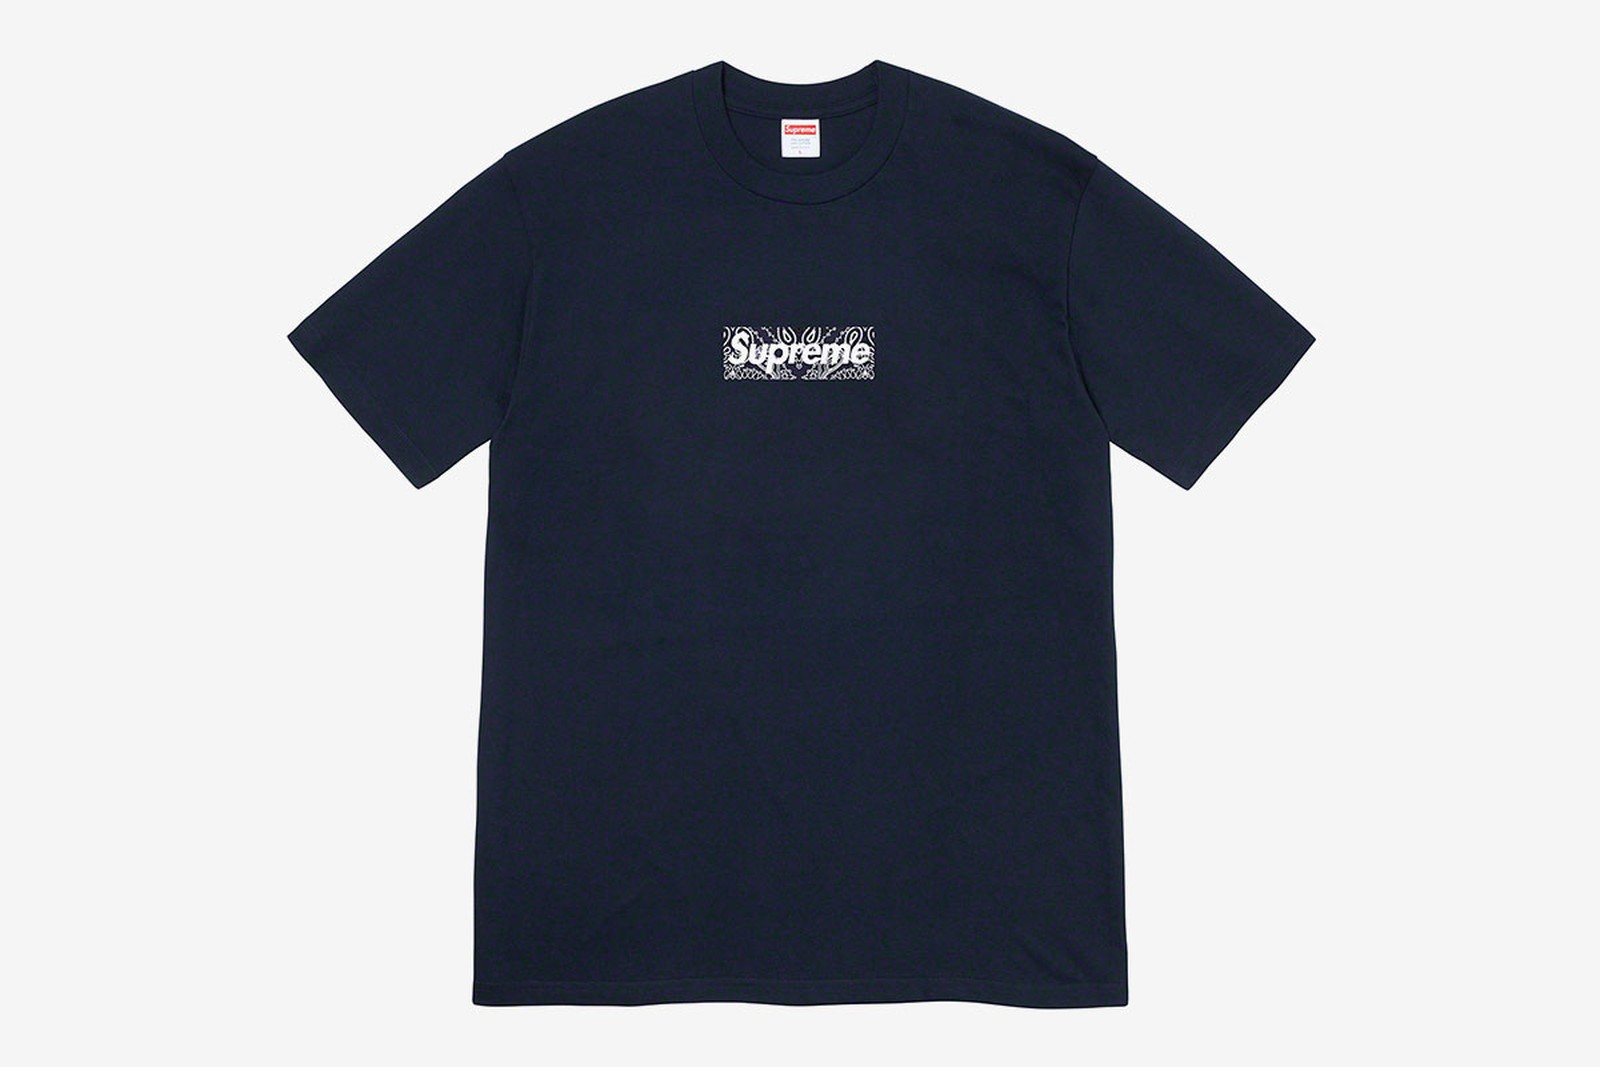 Know Your Supreme T Shirt Design